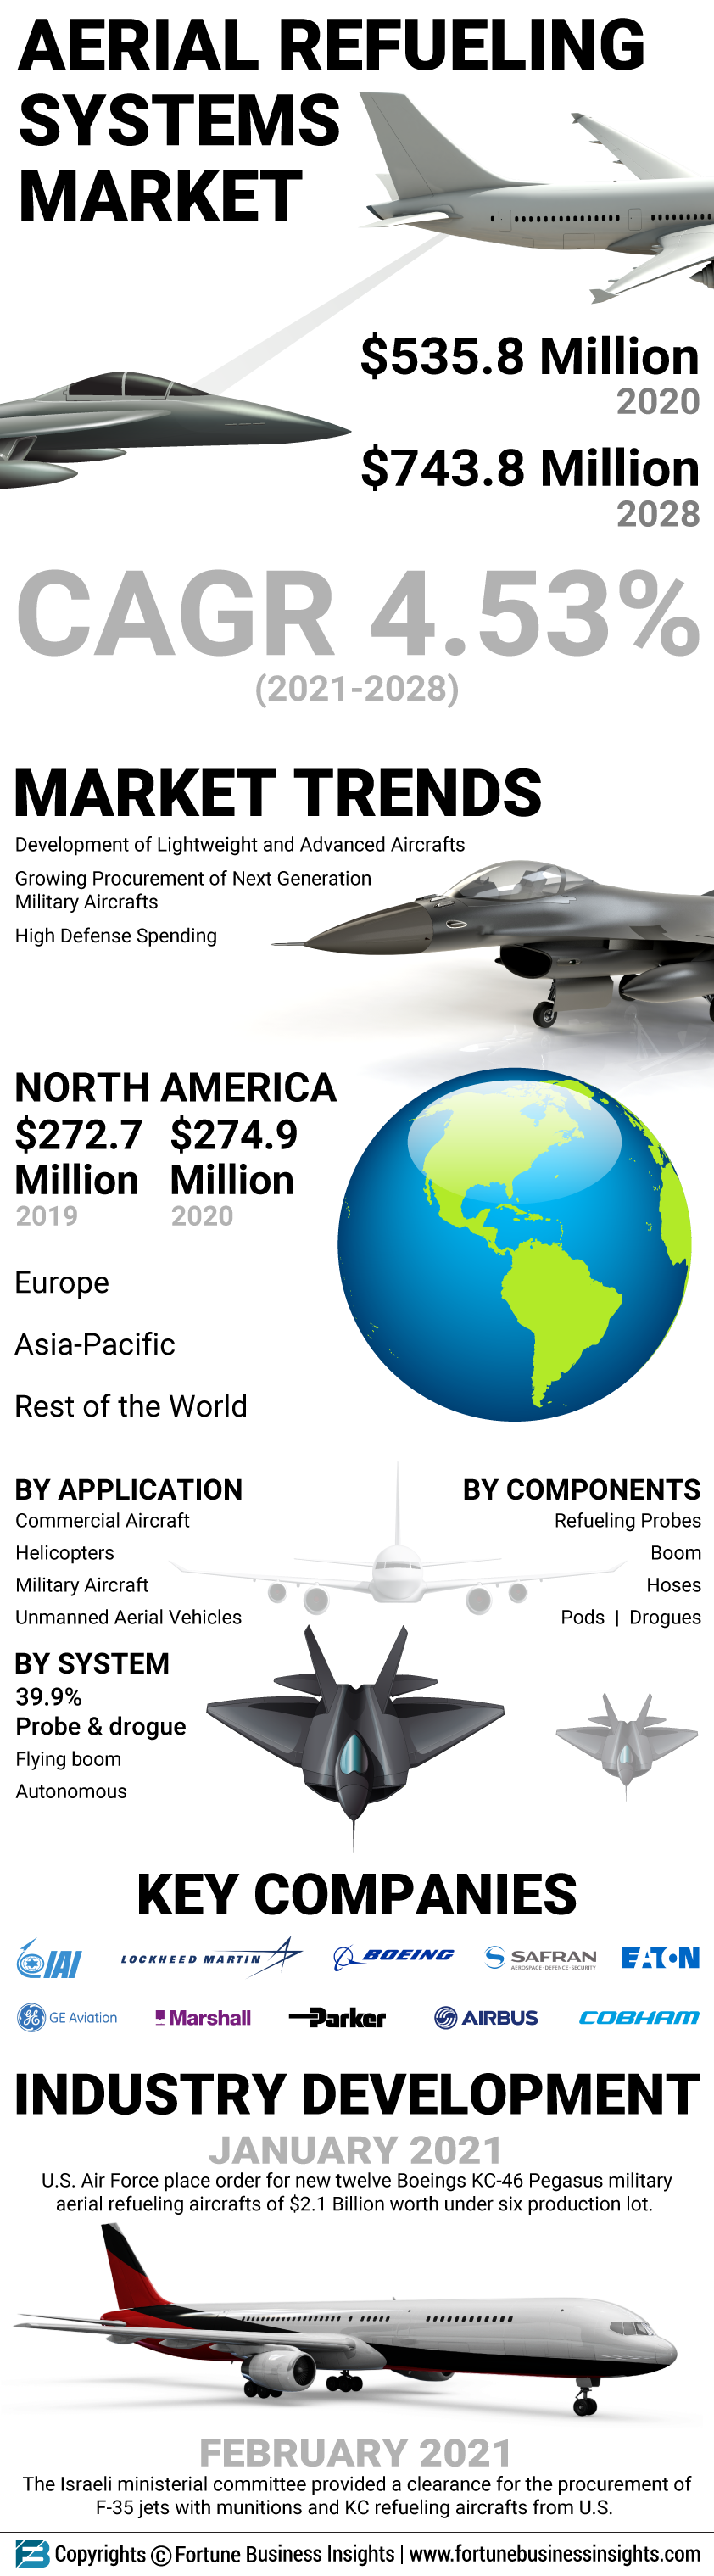 Aerial Refueling Systems Market